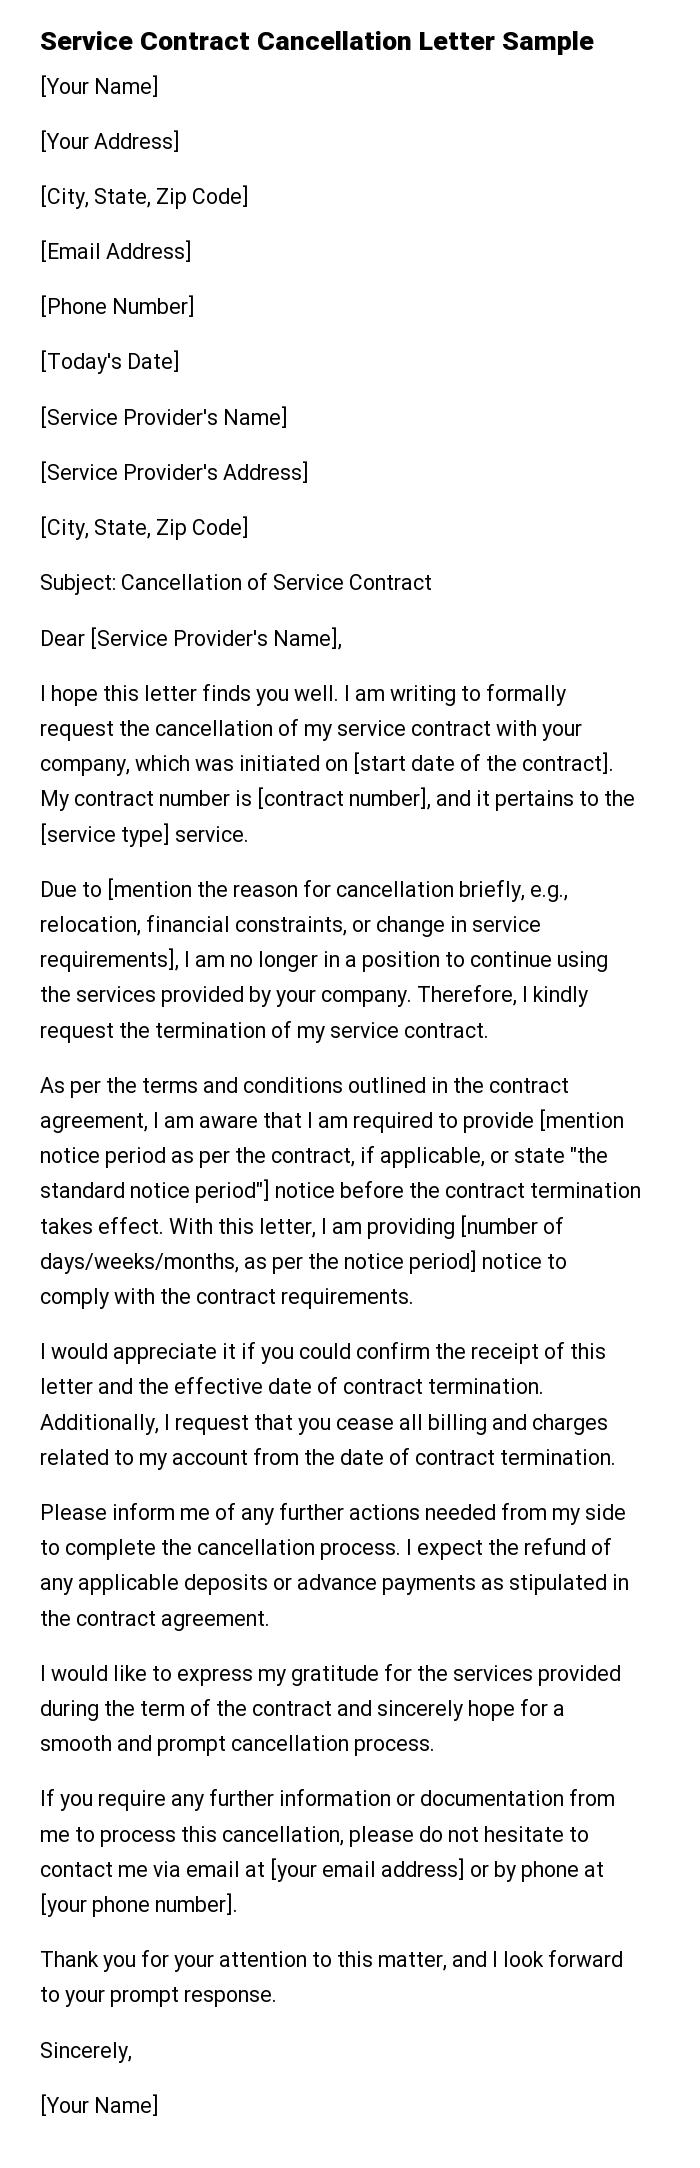 Service Contract Cancellation Letter Sample